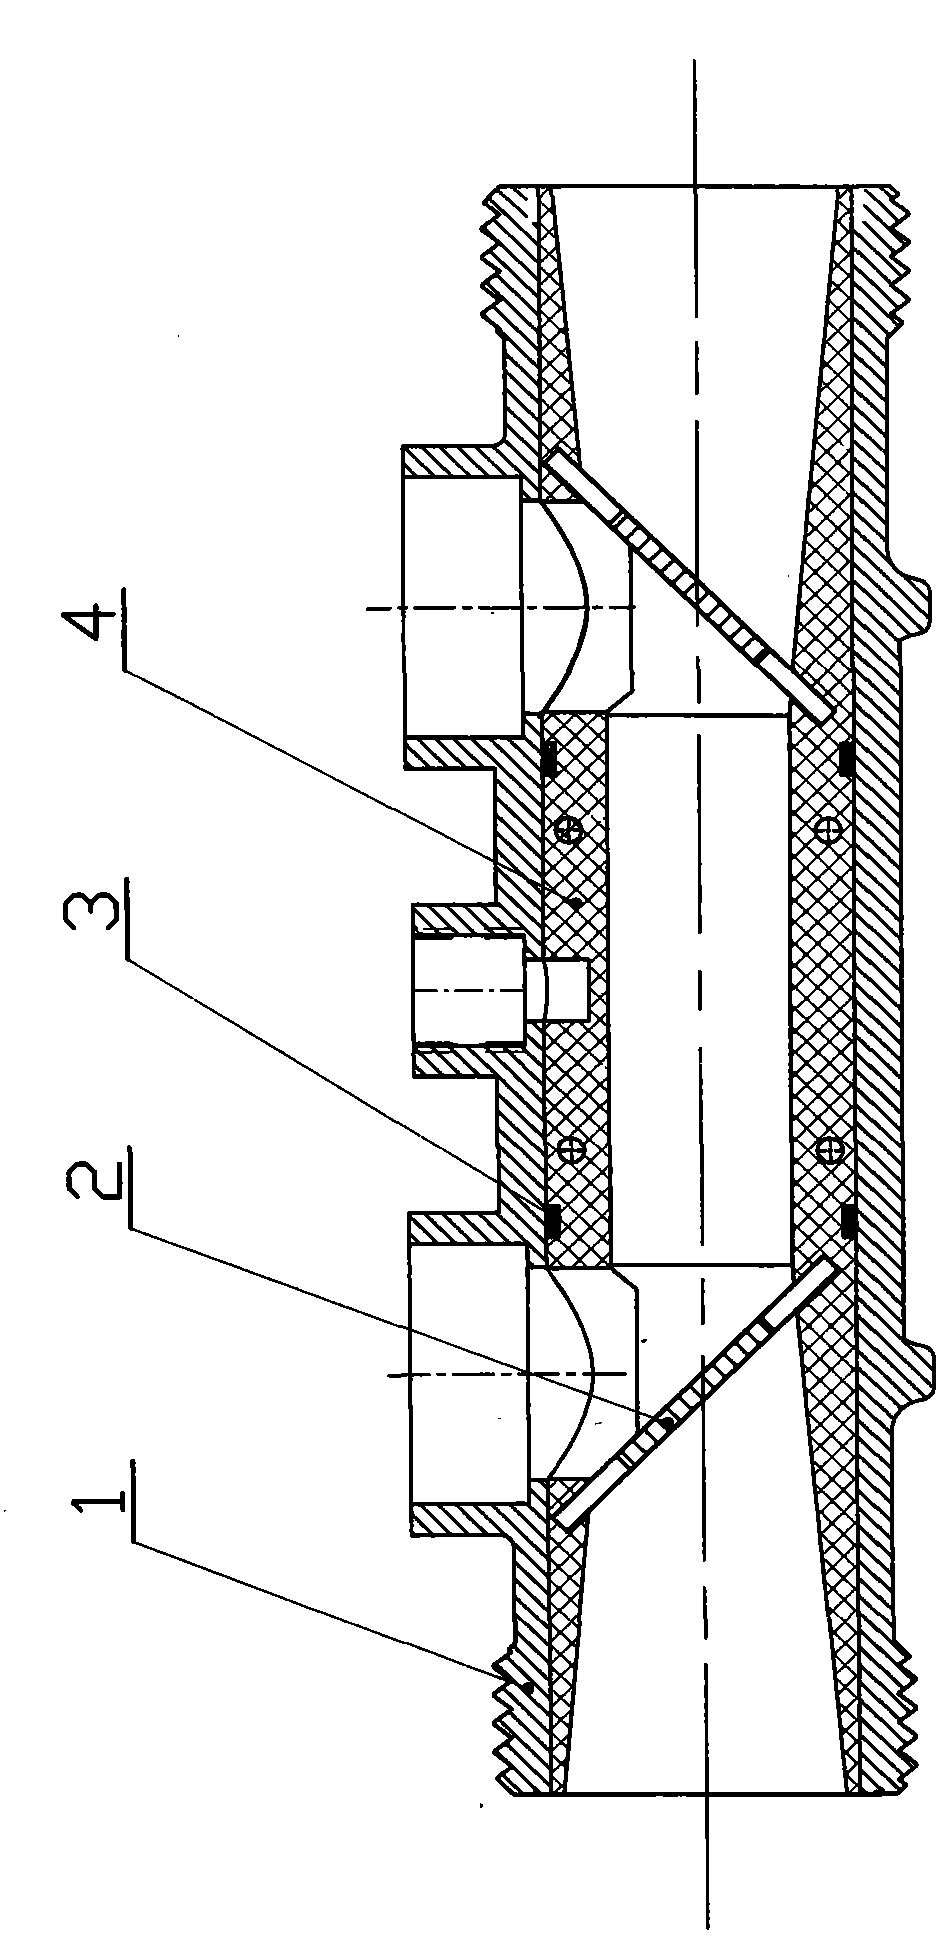 Novel support and pipe section of ultrasonic calorimeter and water meter